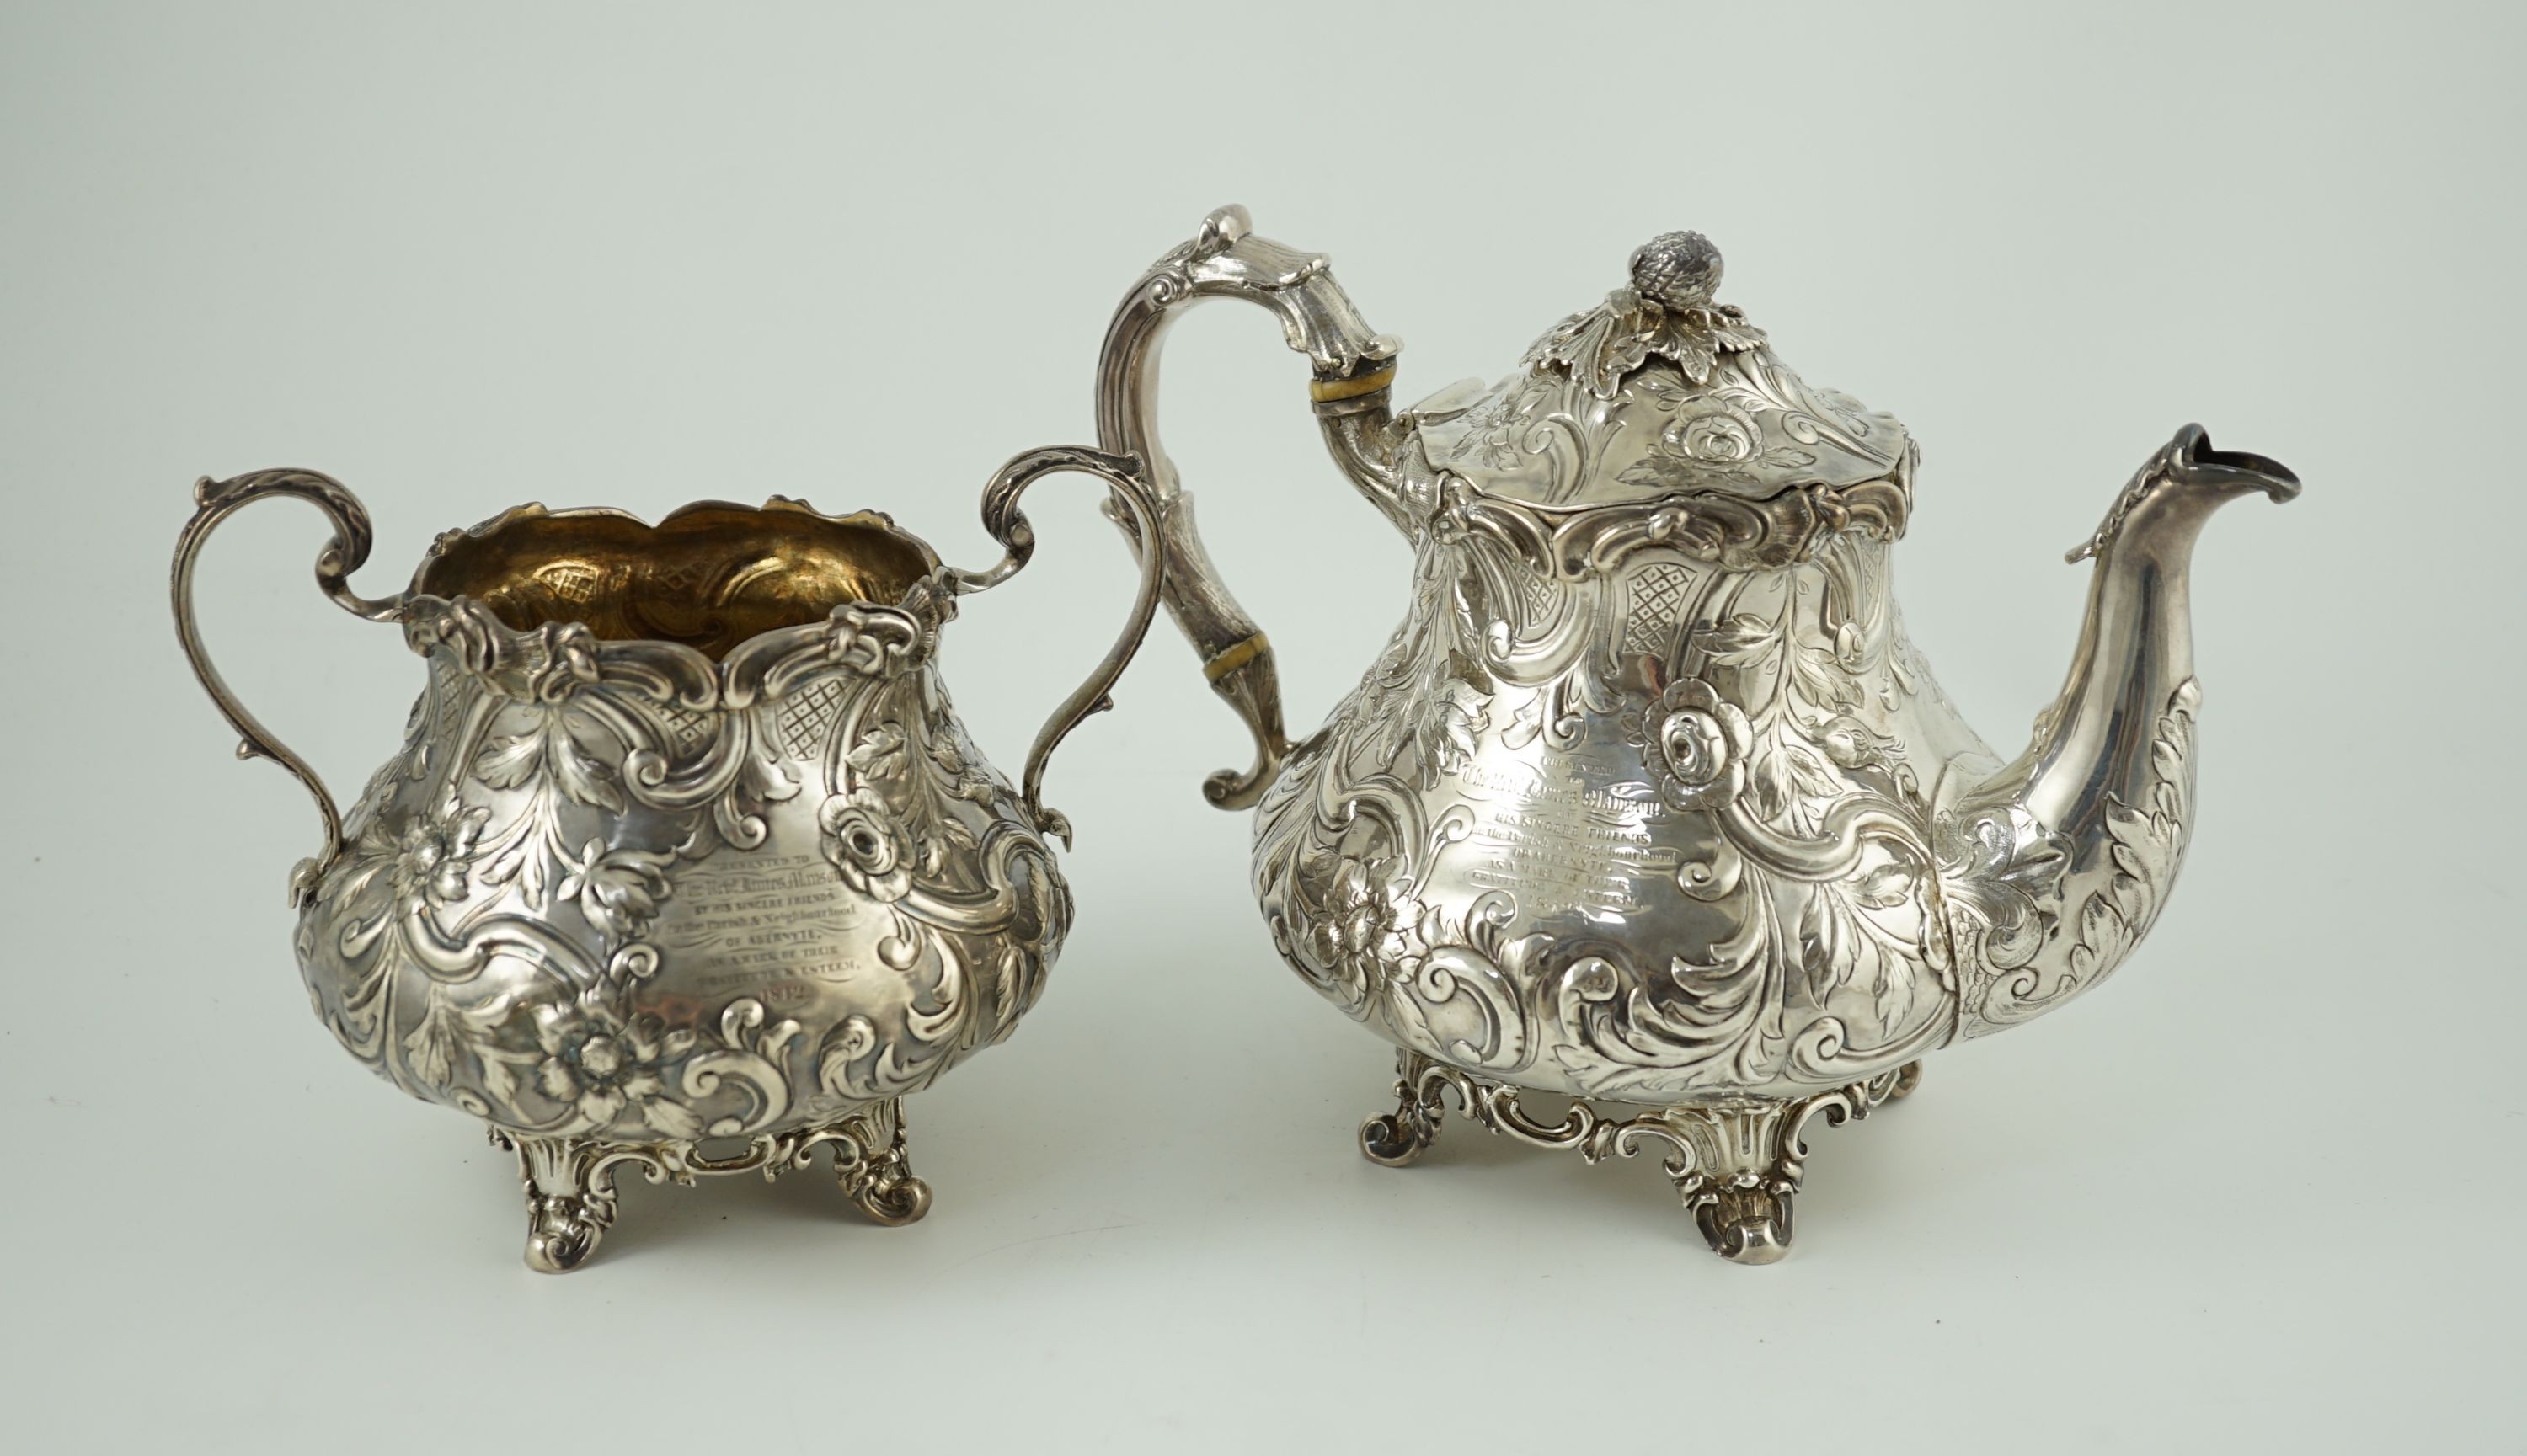 An early Victorian silver teapot and matching sugar bowl, by John Wellby